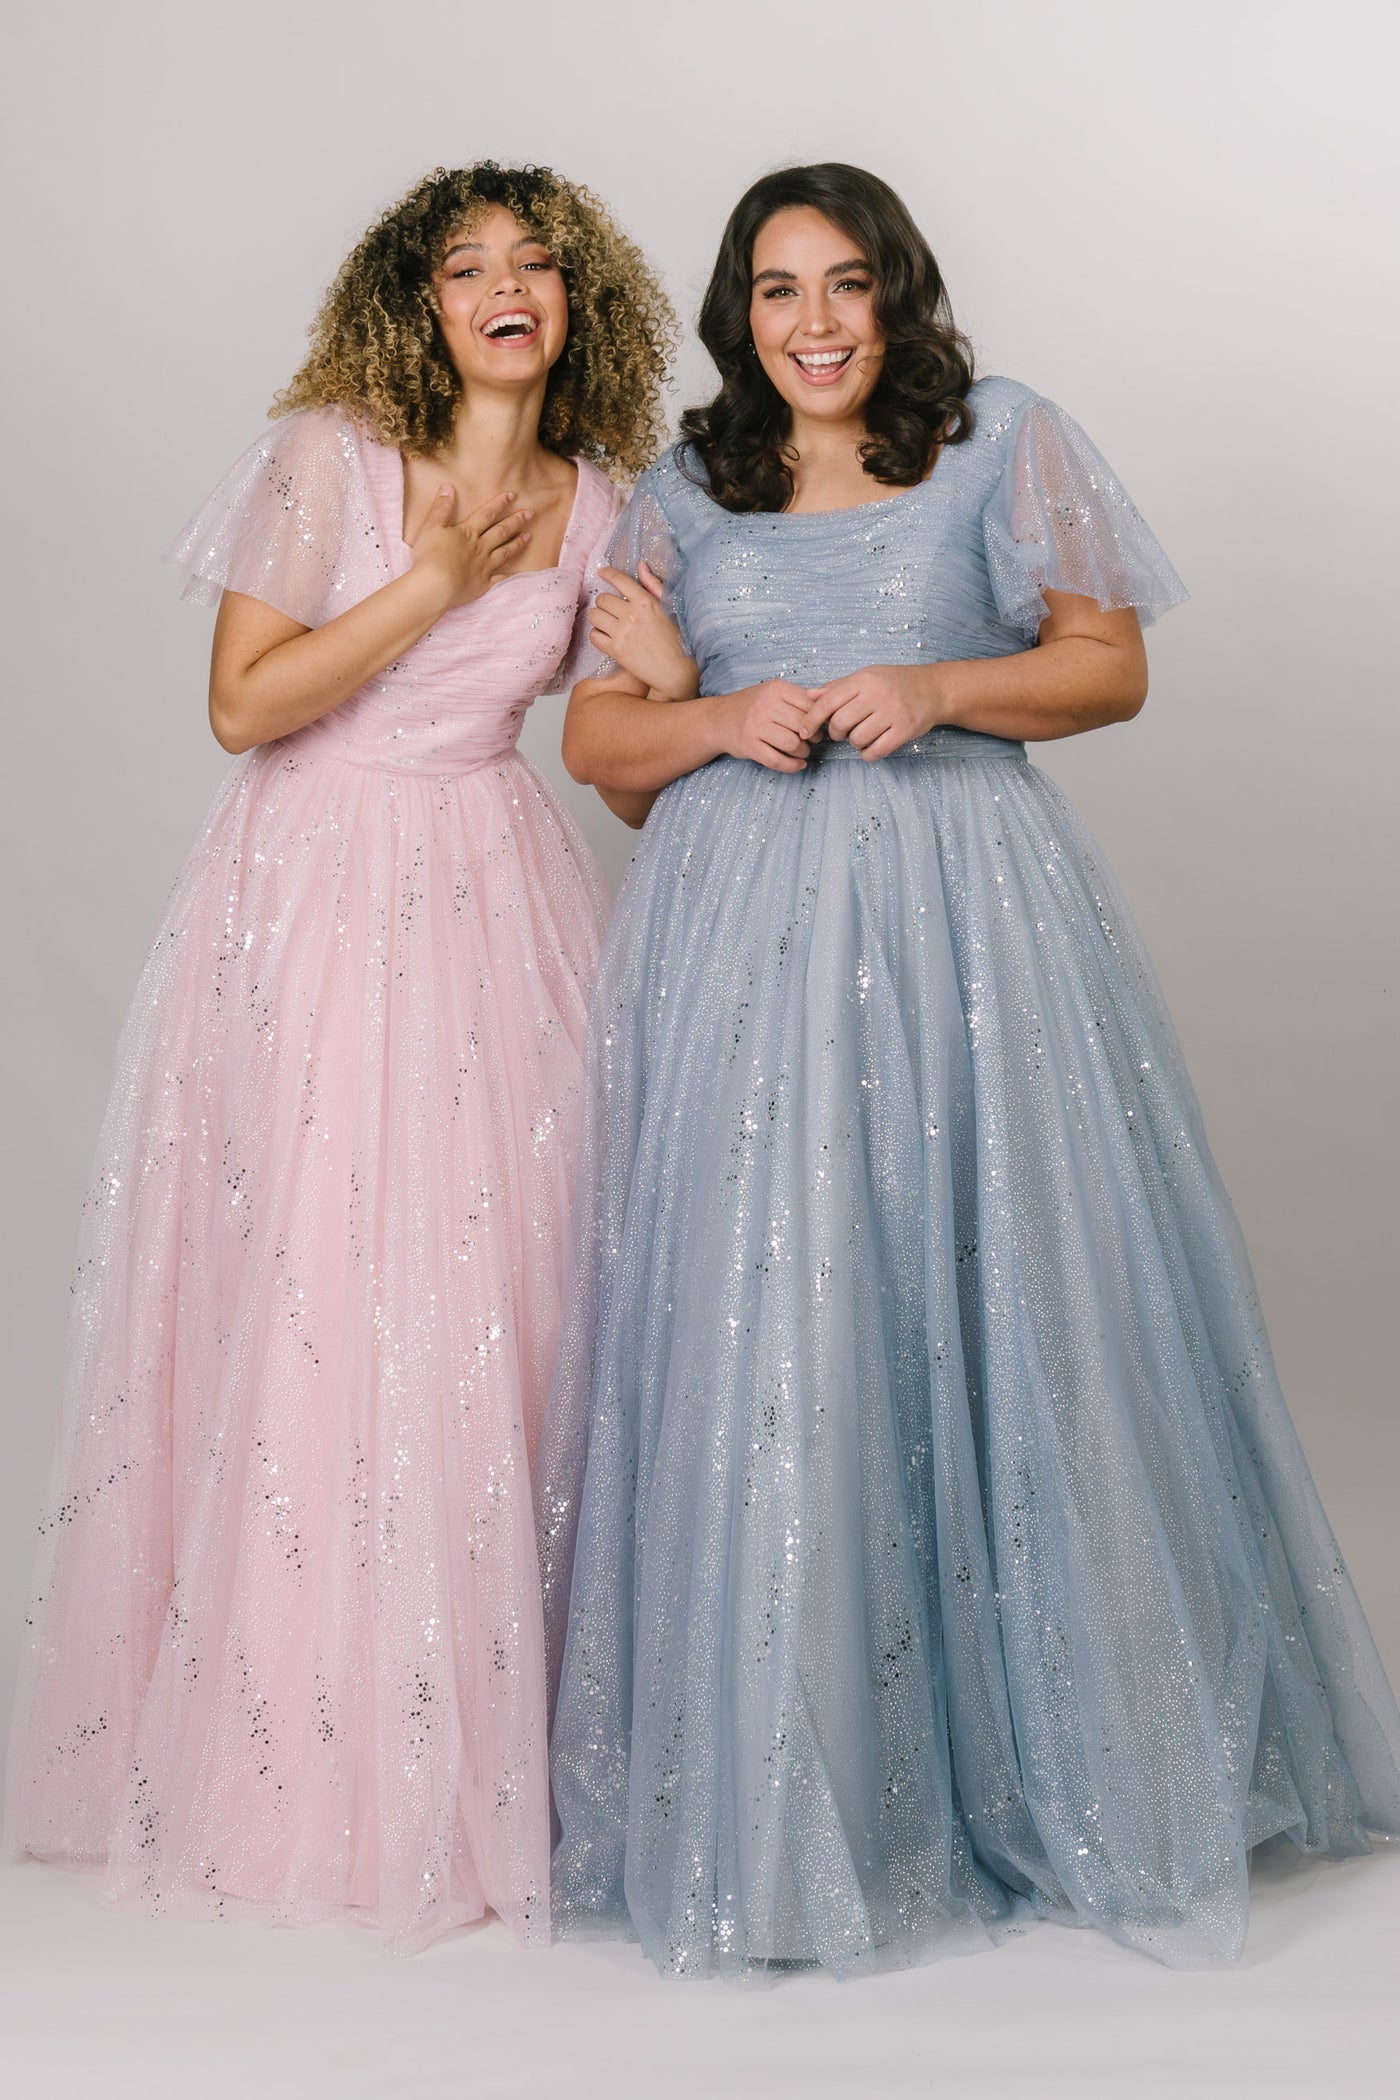 Modest Dresses - Modest Prom Dress - Formalwear Modest Dresses - Bridesmaid Modest Dresses. Modesl showing dress in pink and blue.